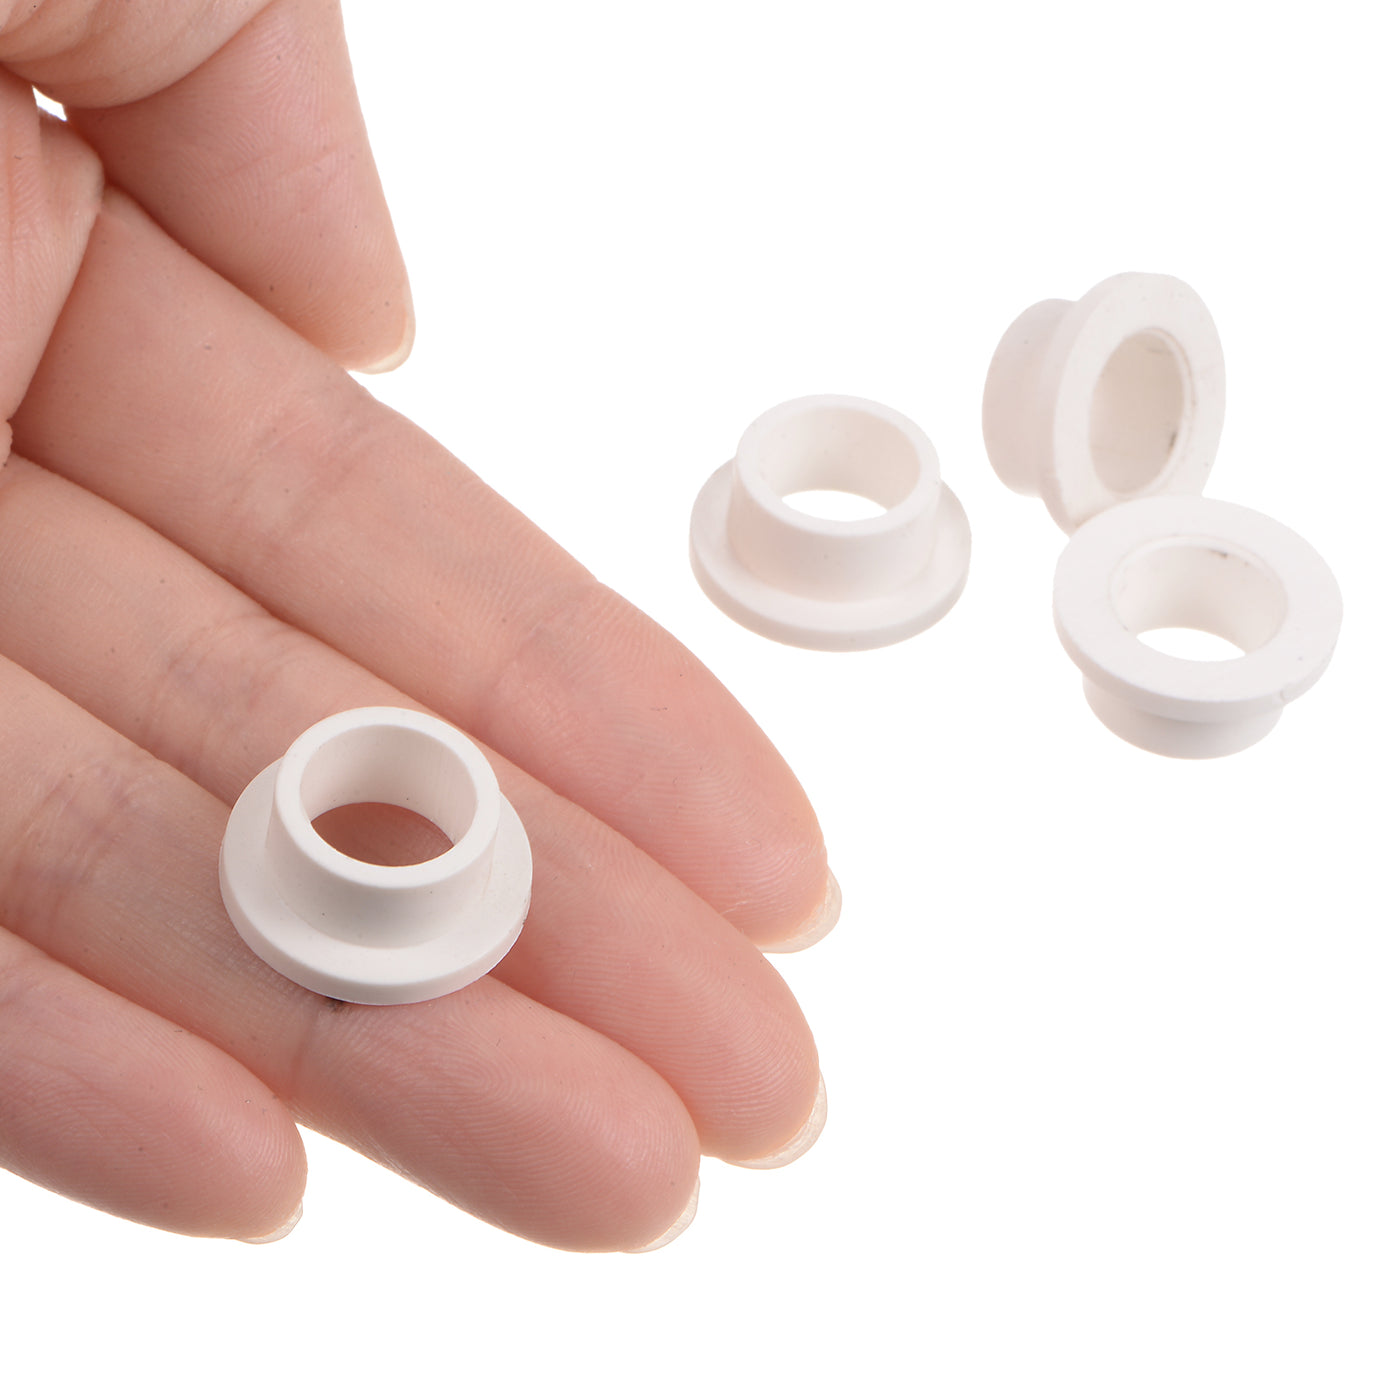 uxcell Uxcell 4pcs Flanged Sleeve Bearings 10.1mm ID 13mm OD 8mm Length Nylon Bushings, White